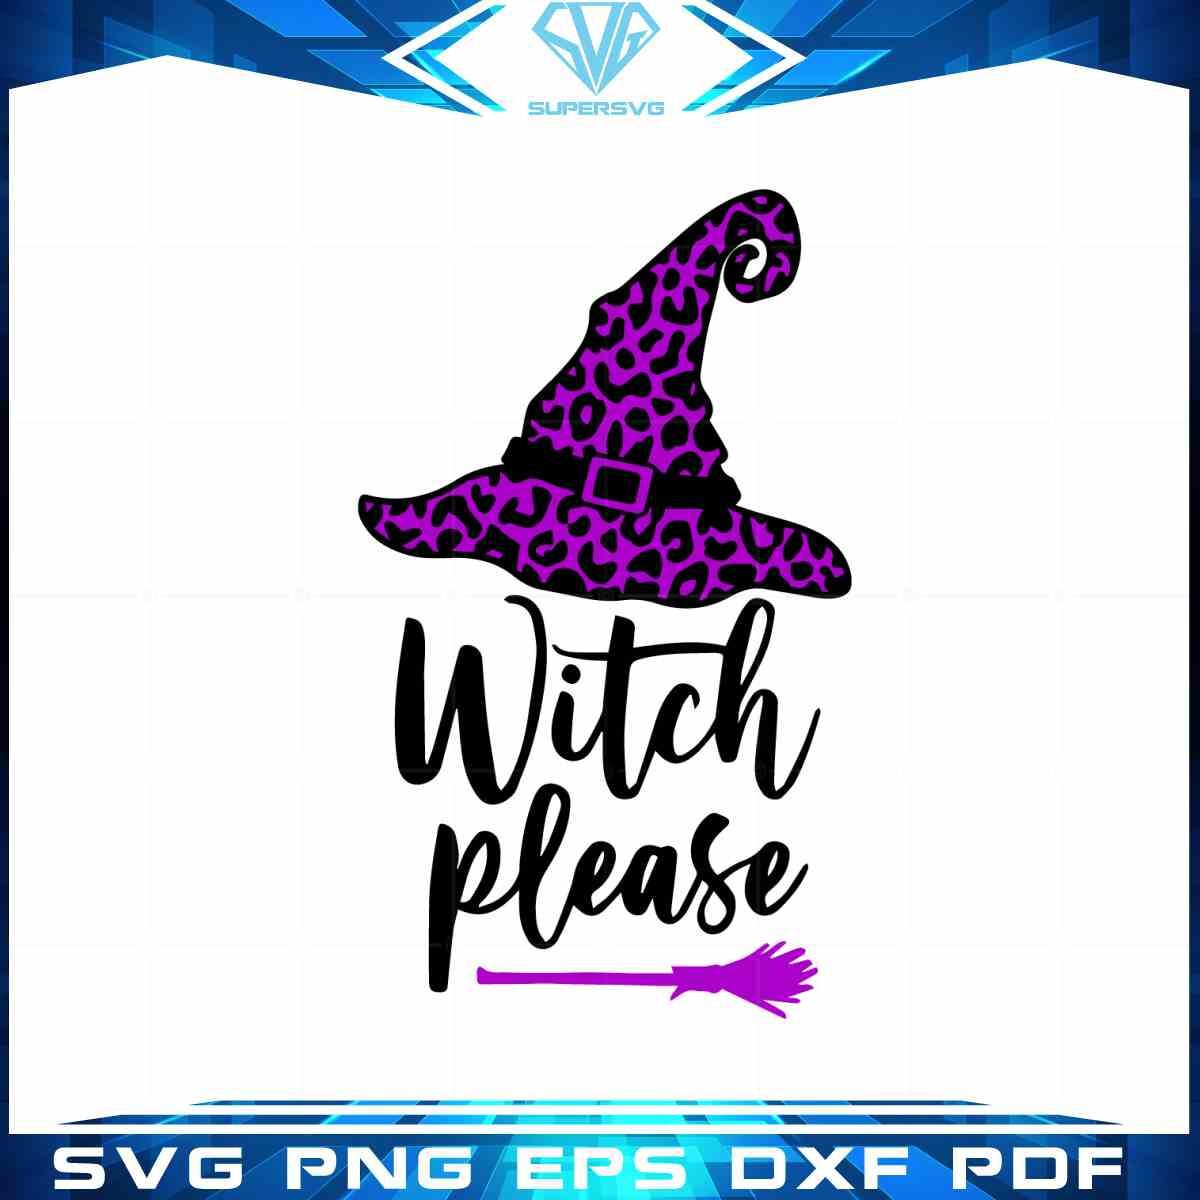 halloween-leopard-print-witch-hat-please-svg-graphic-designs-files